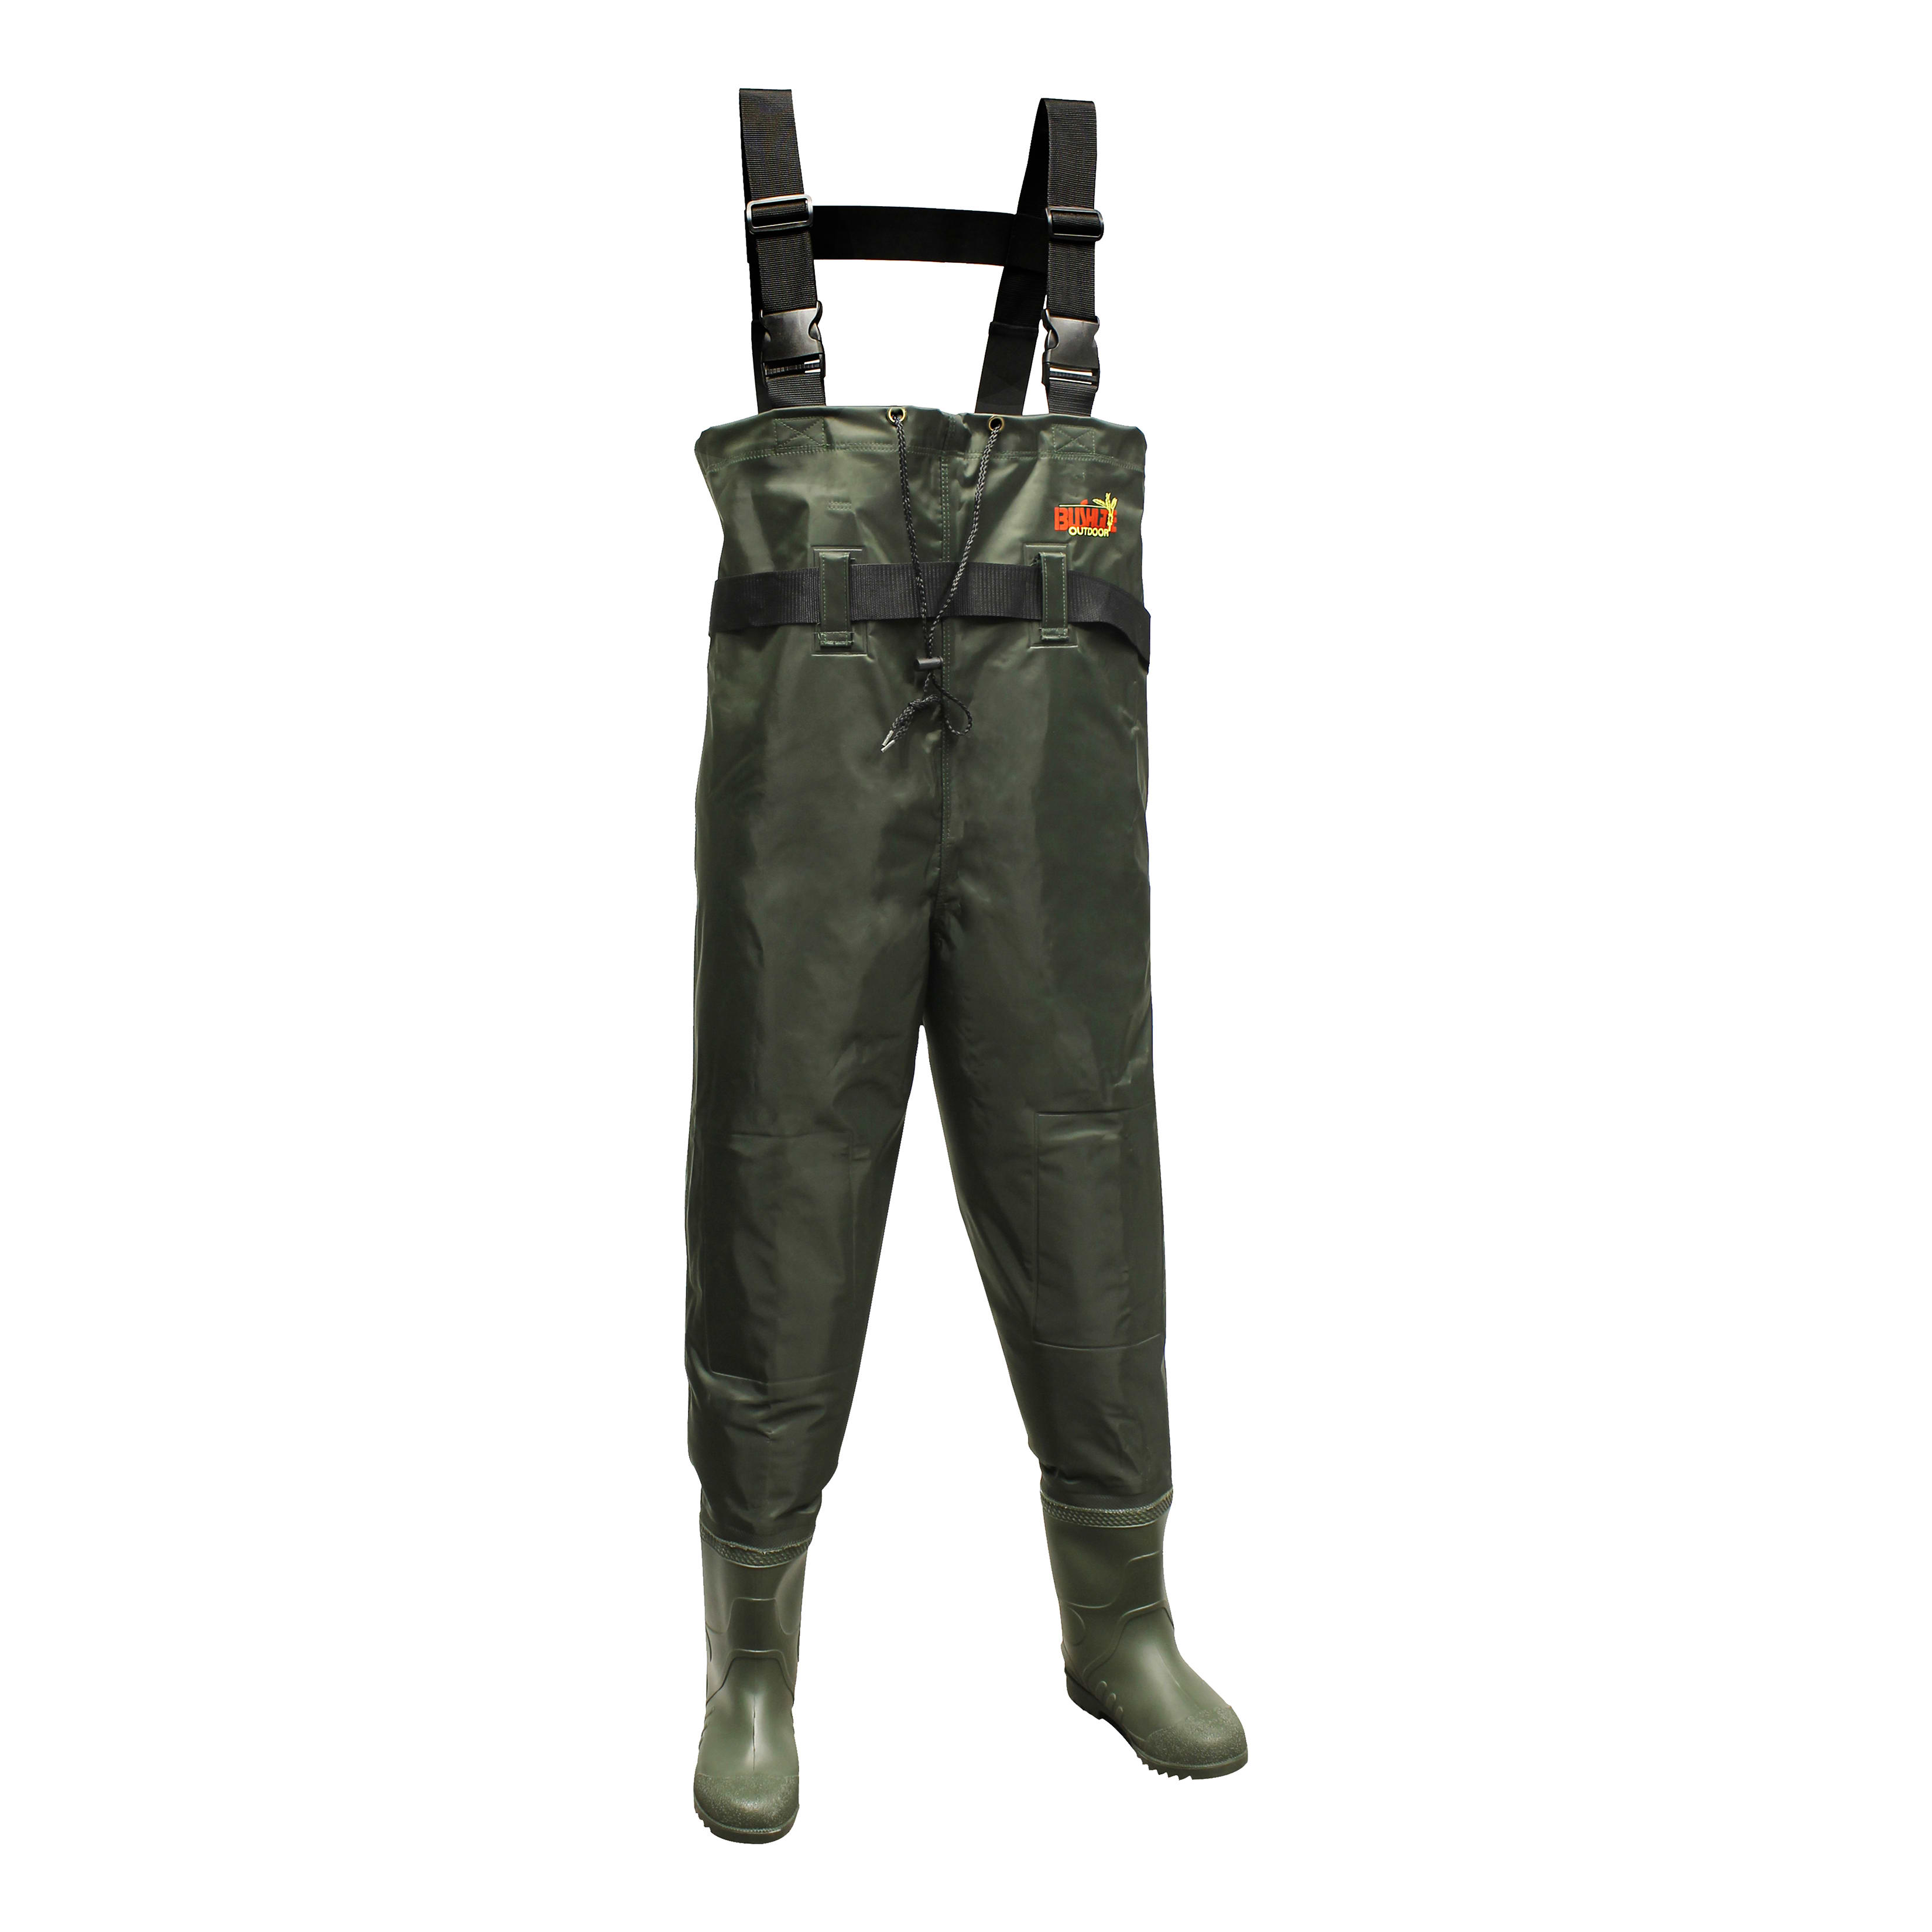 White River Fly Shop Three Forks Lug Sole Chest Waders for Men - Light Brown - 10M